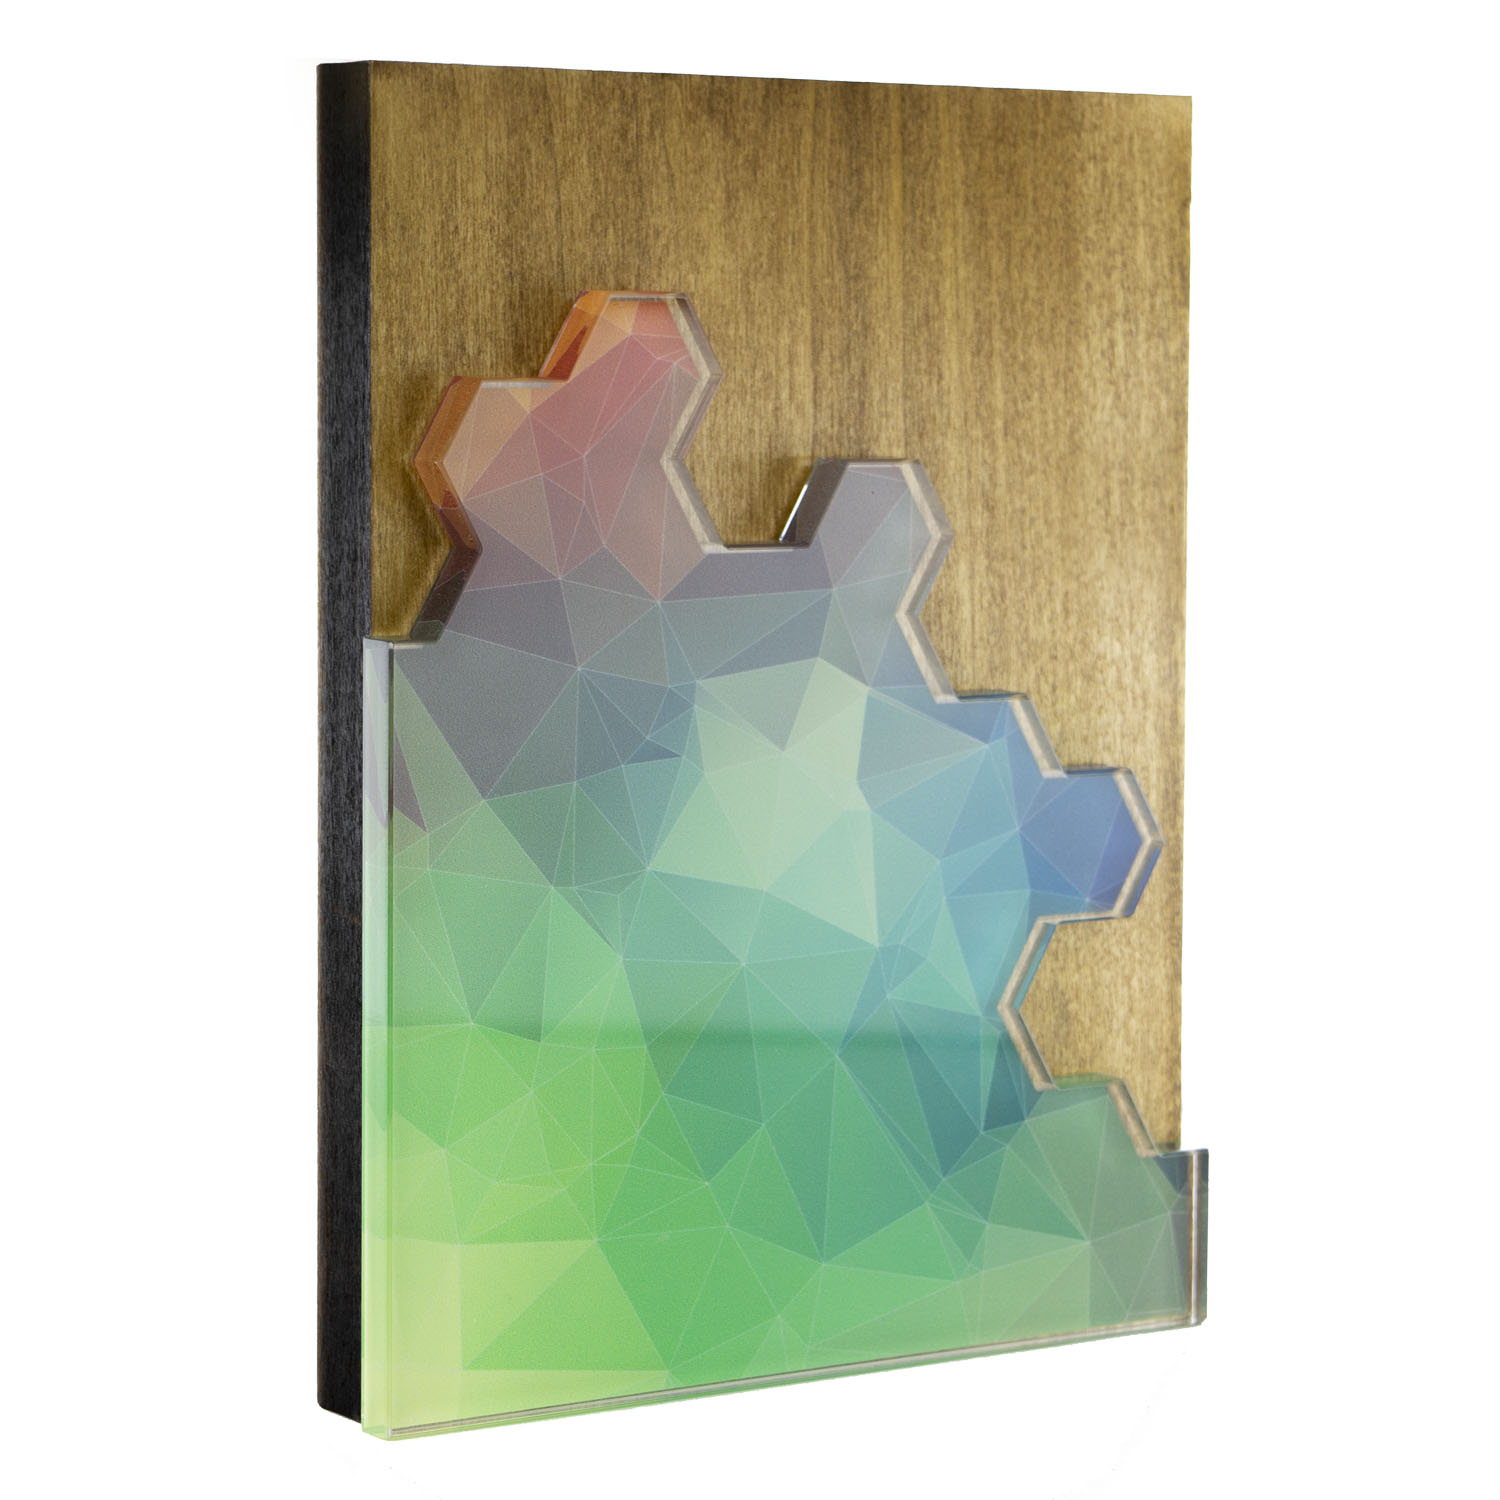 Plaque Hex Puzzle Modern Mixed Material Award